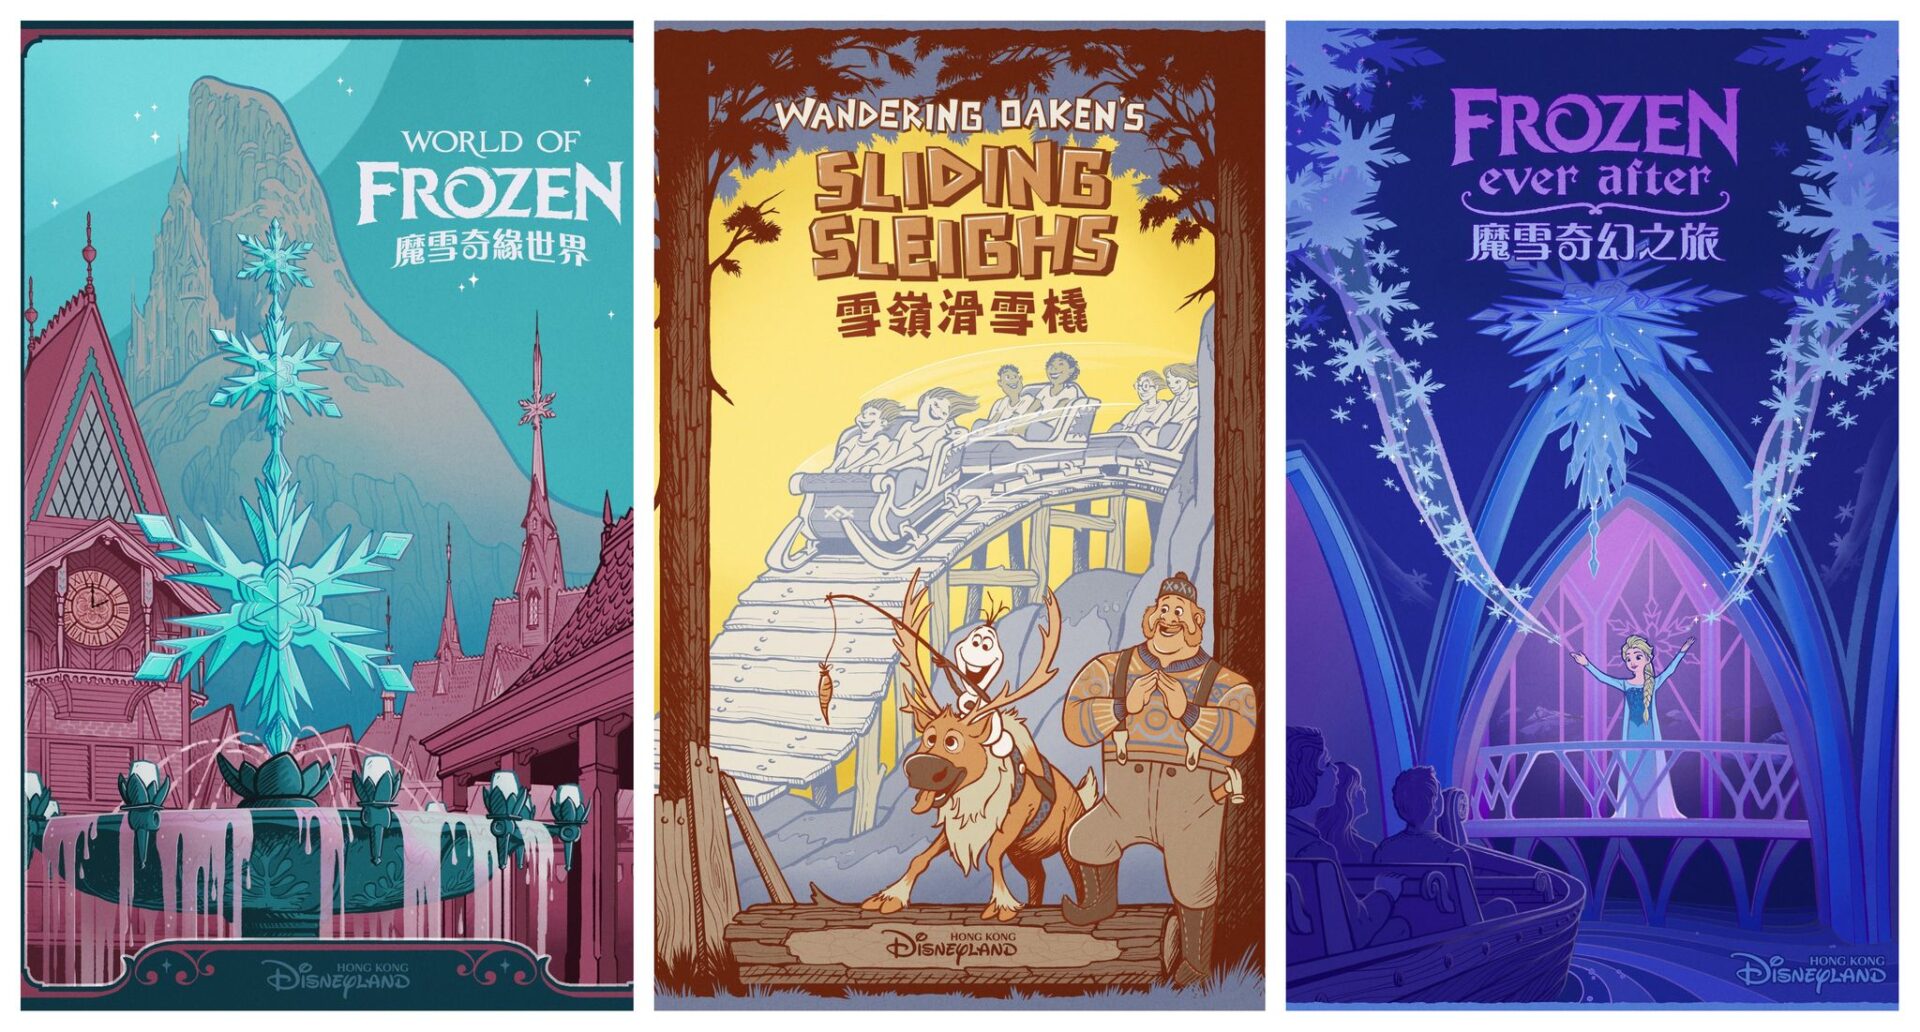 New Posters Revealed for World of Frozen at Hong Kong Disneyland